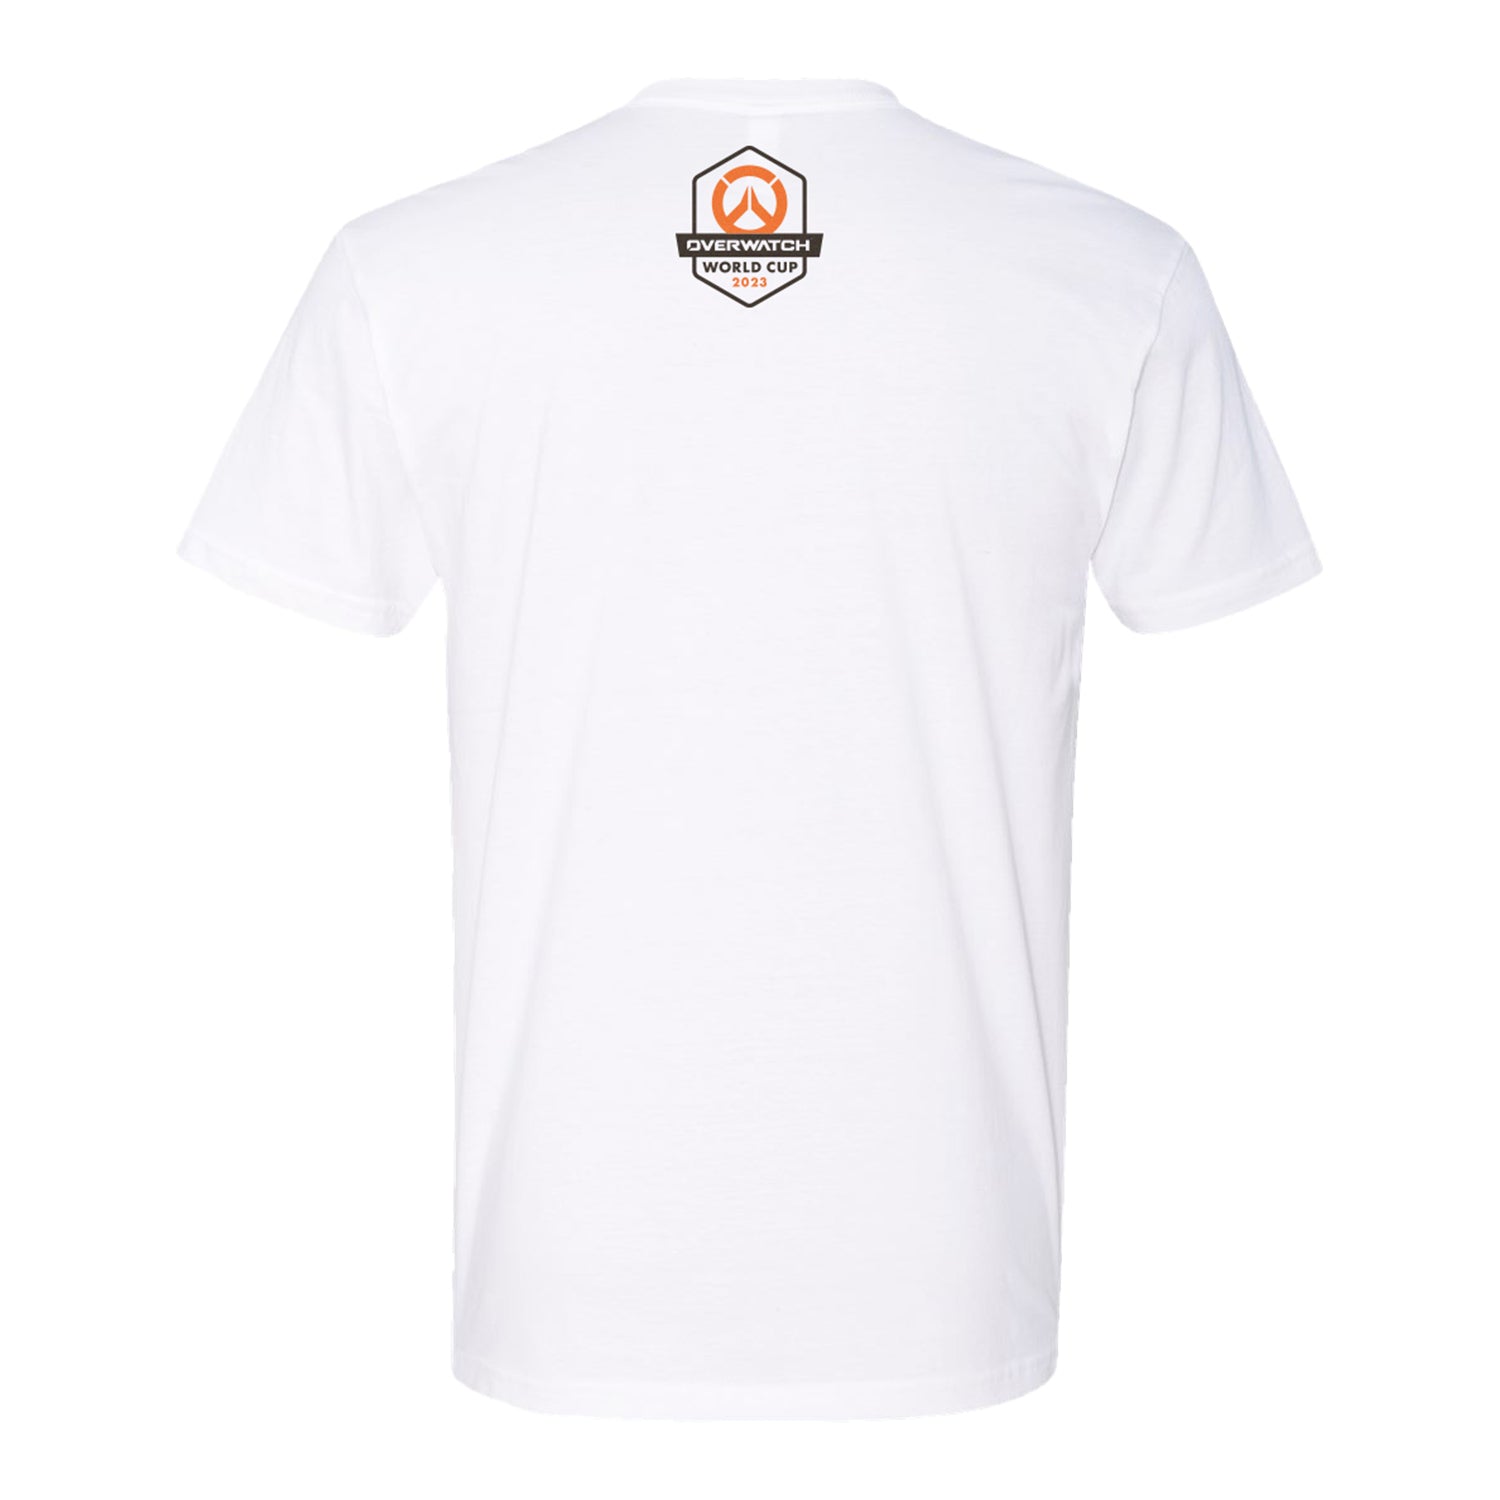 Overwatch World Cup T-Shirt, White - Back View